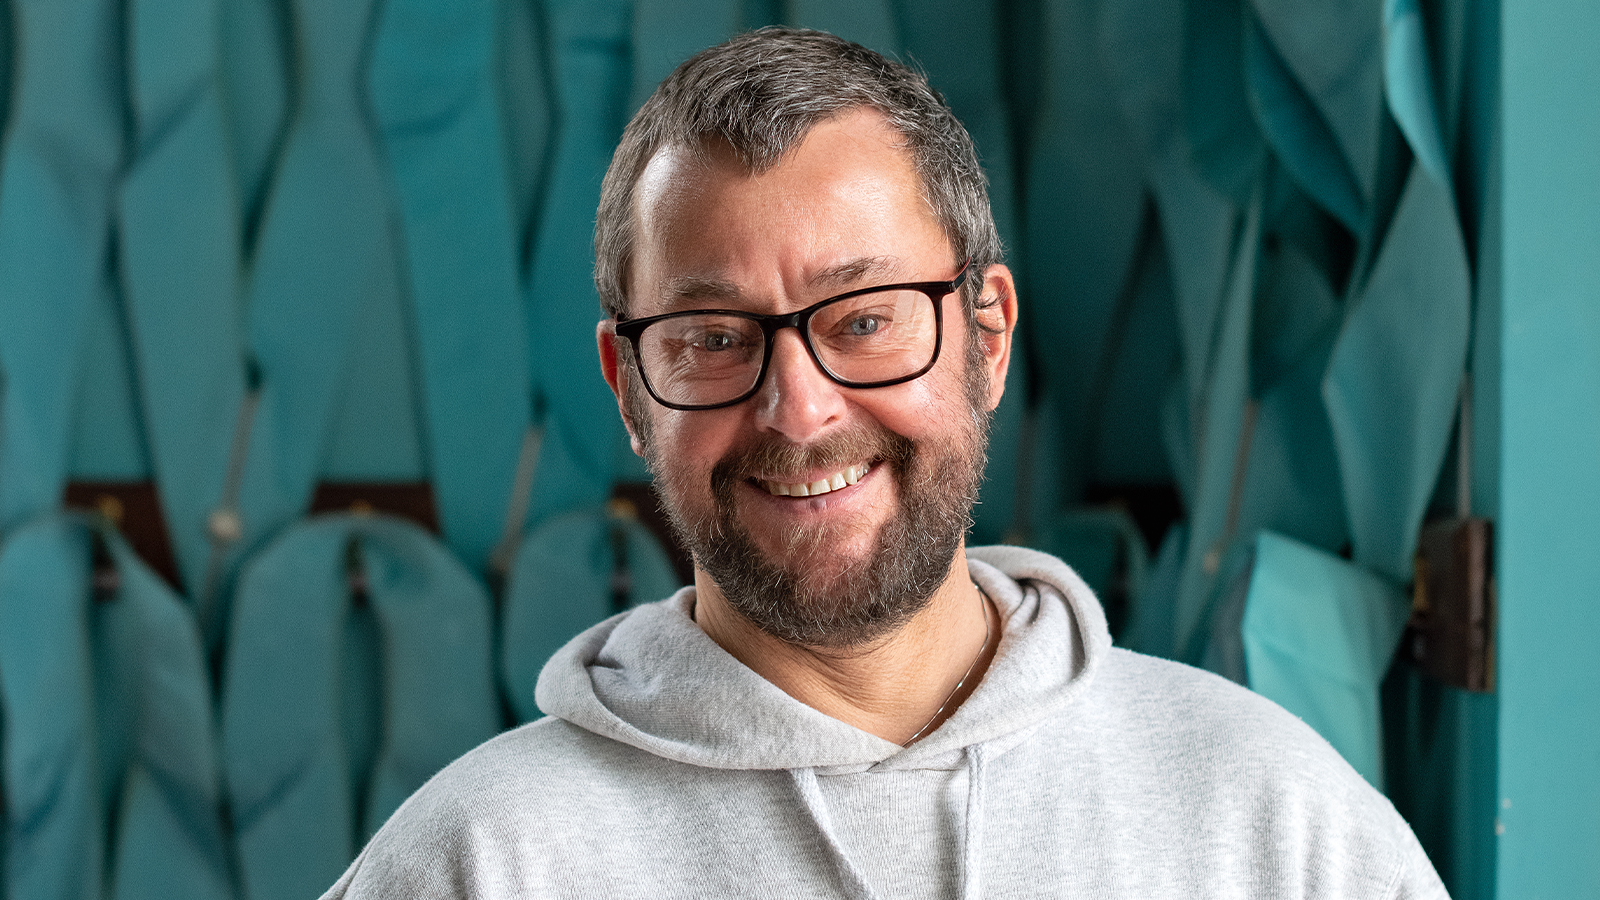 Steven is a bearded man, wearing a light grey hoodie and black, thick rimmed glasses. He is smiling at the camera.